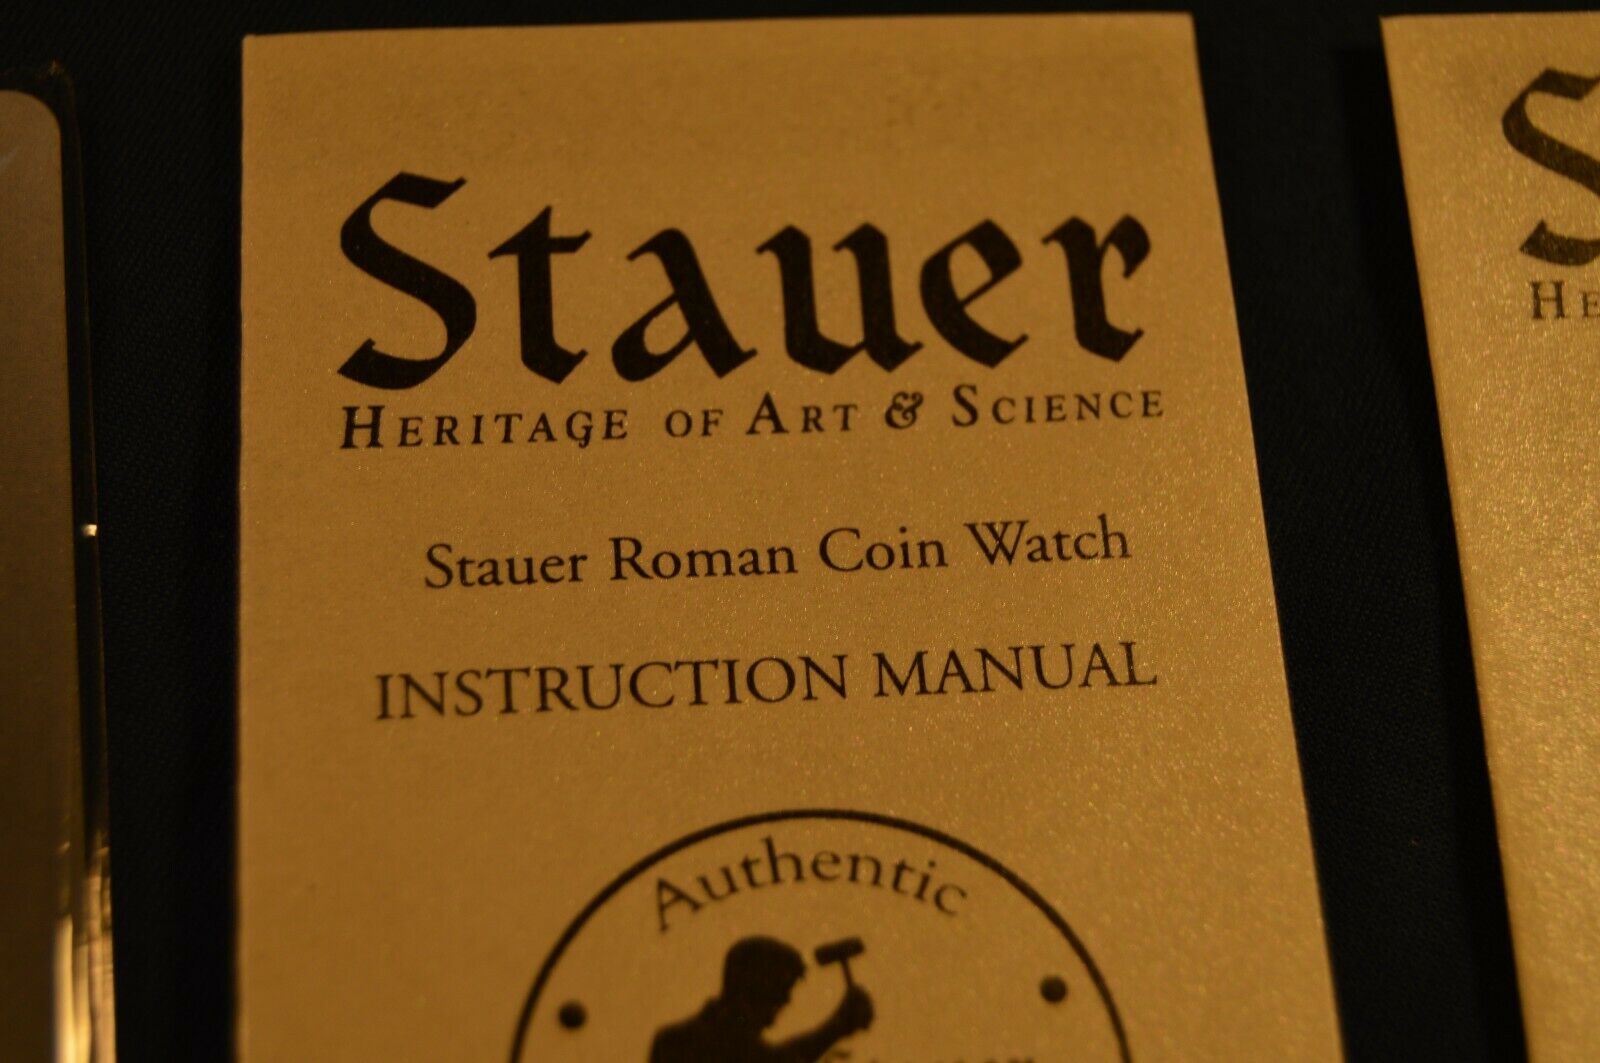 Stauer Roman Coin Watch Self-Winding 19258 3 ATM Water Resistant